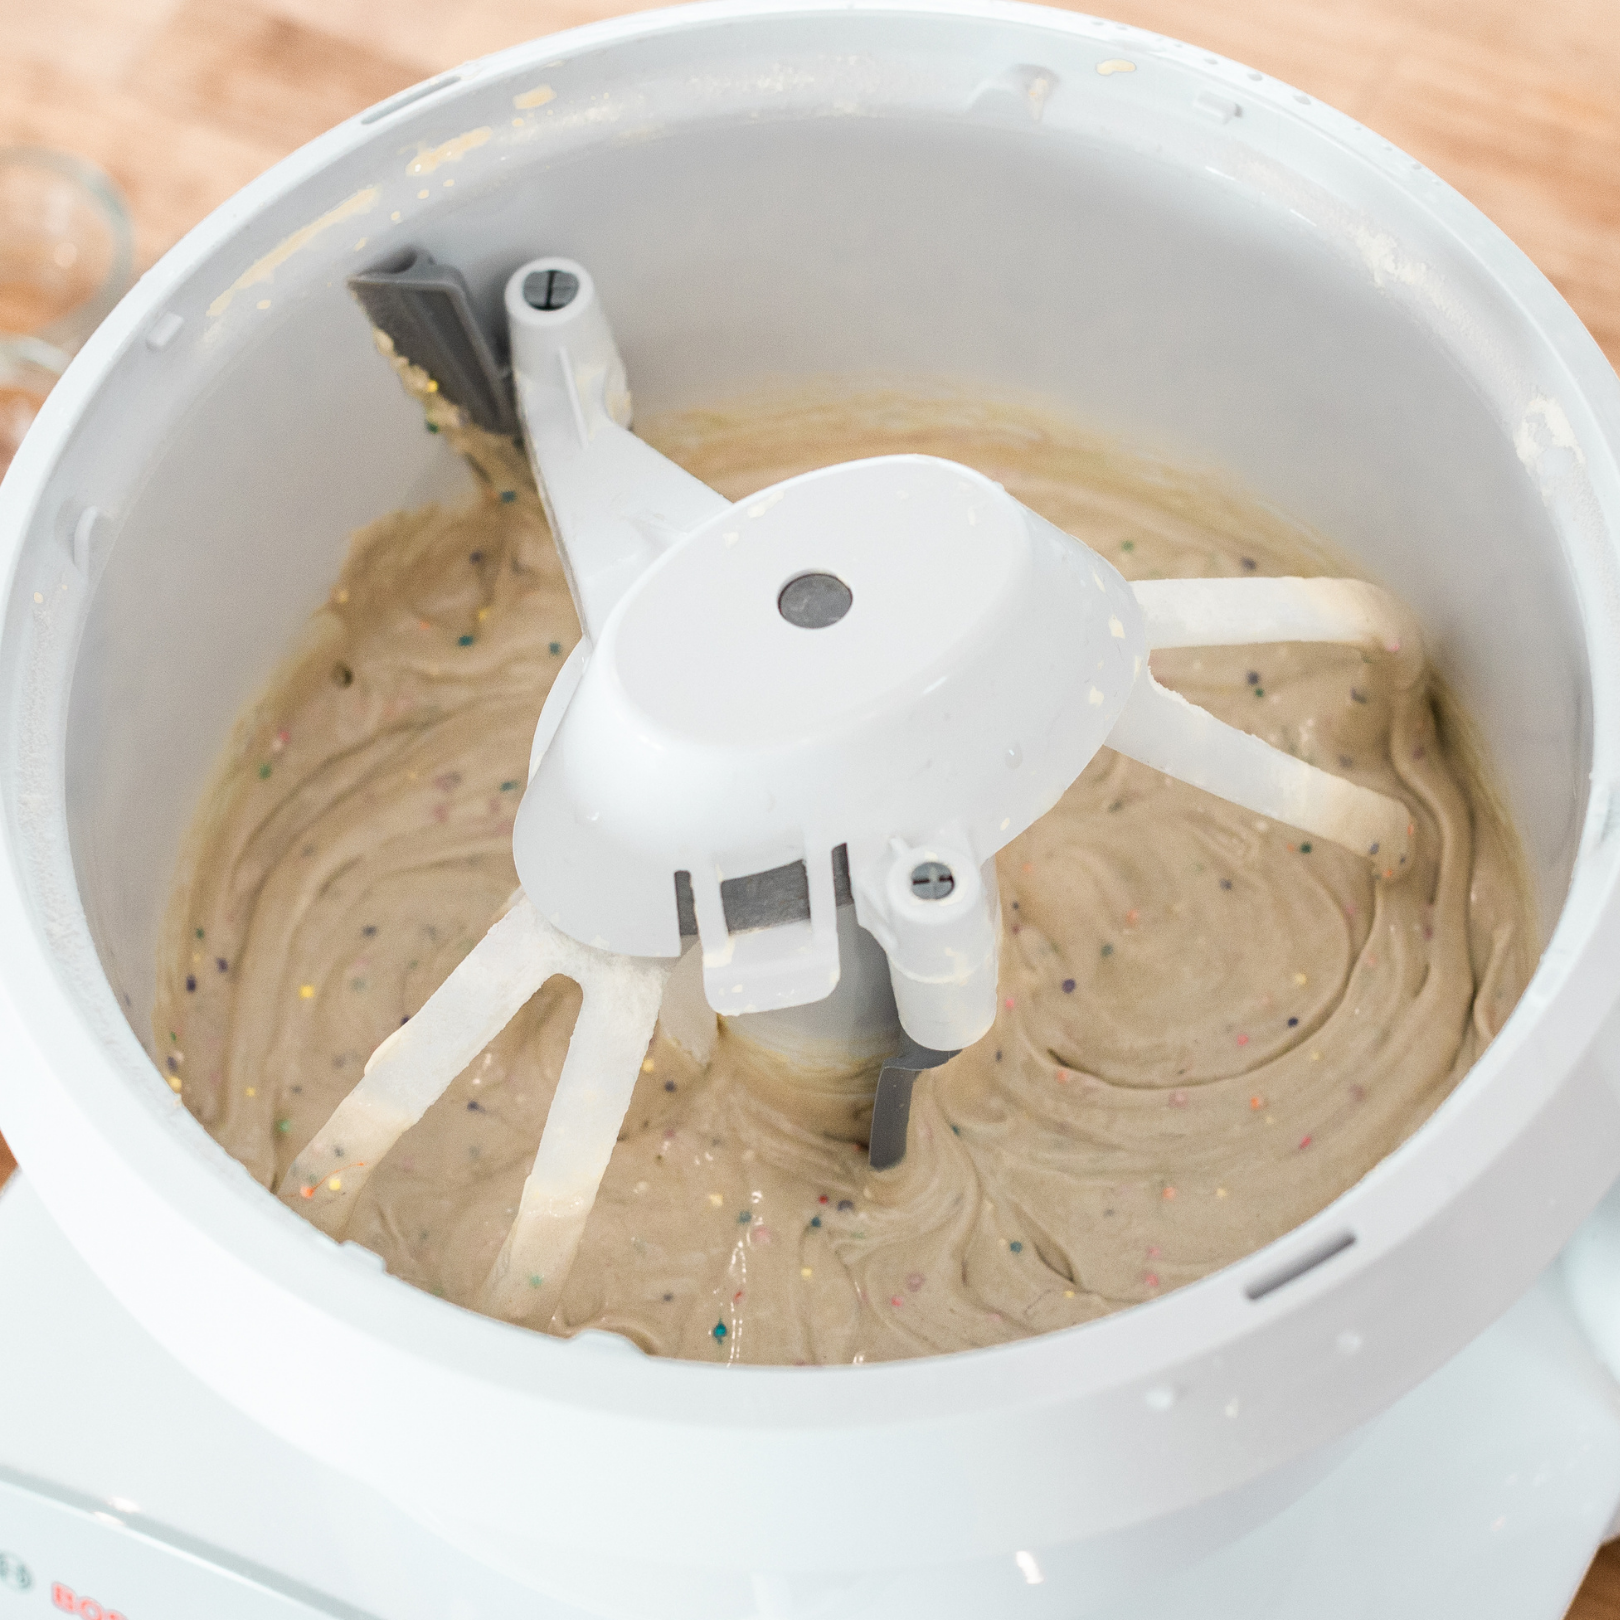 Best Mixer For Small Spaces - The Bosch Compact Review